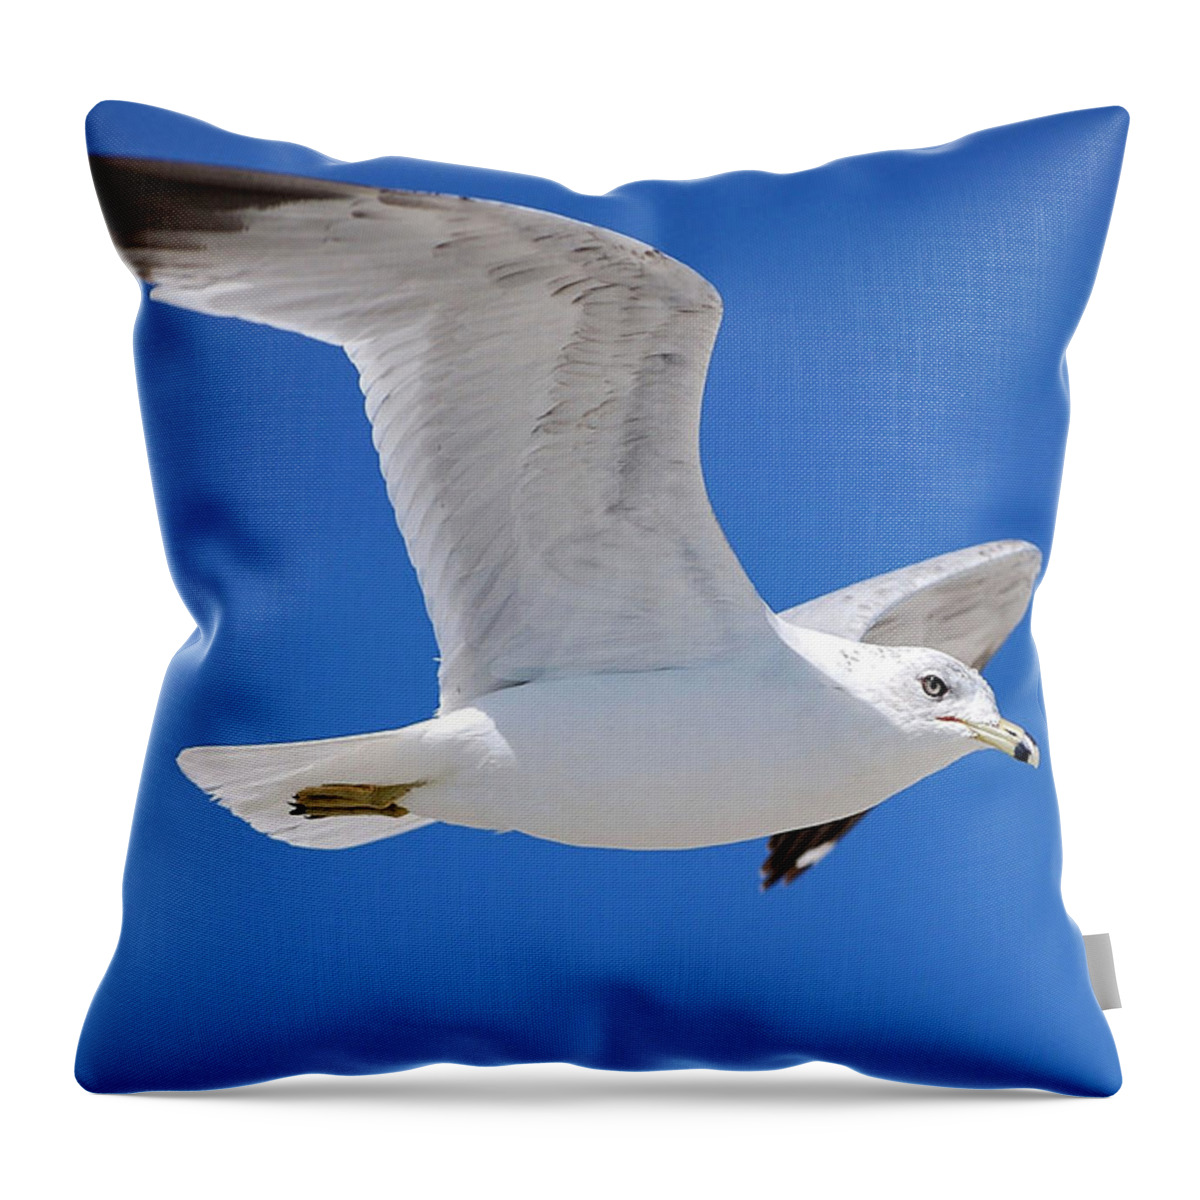 Photography Throw Pillow featuring the photograph Seagull by Ludwig Keck